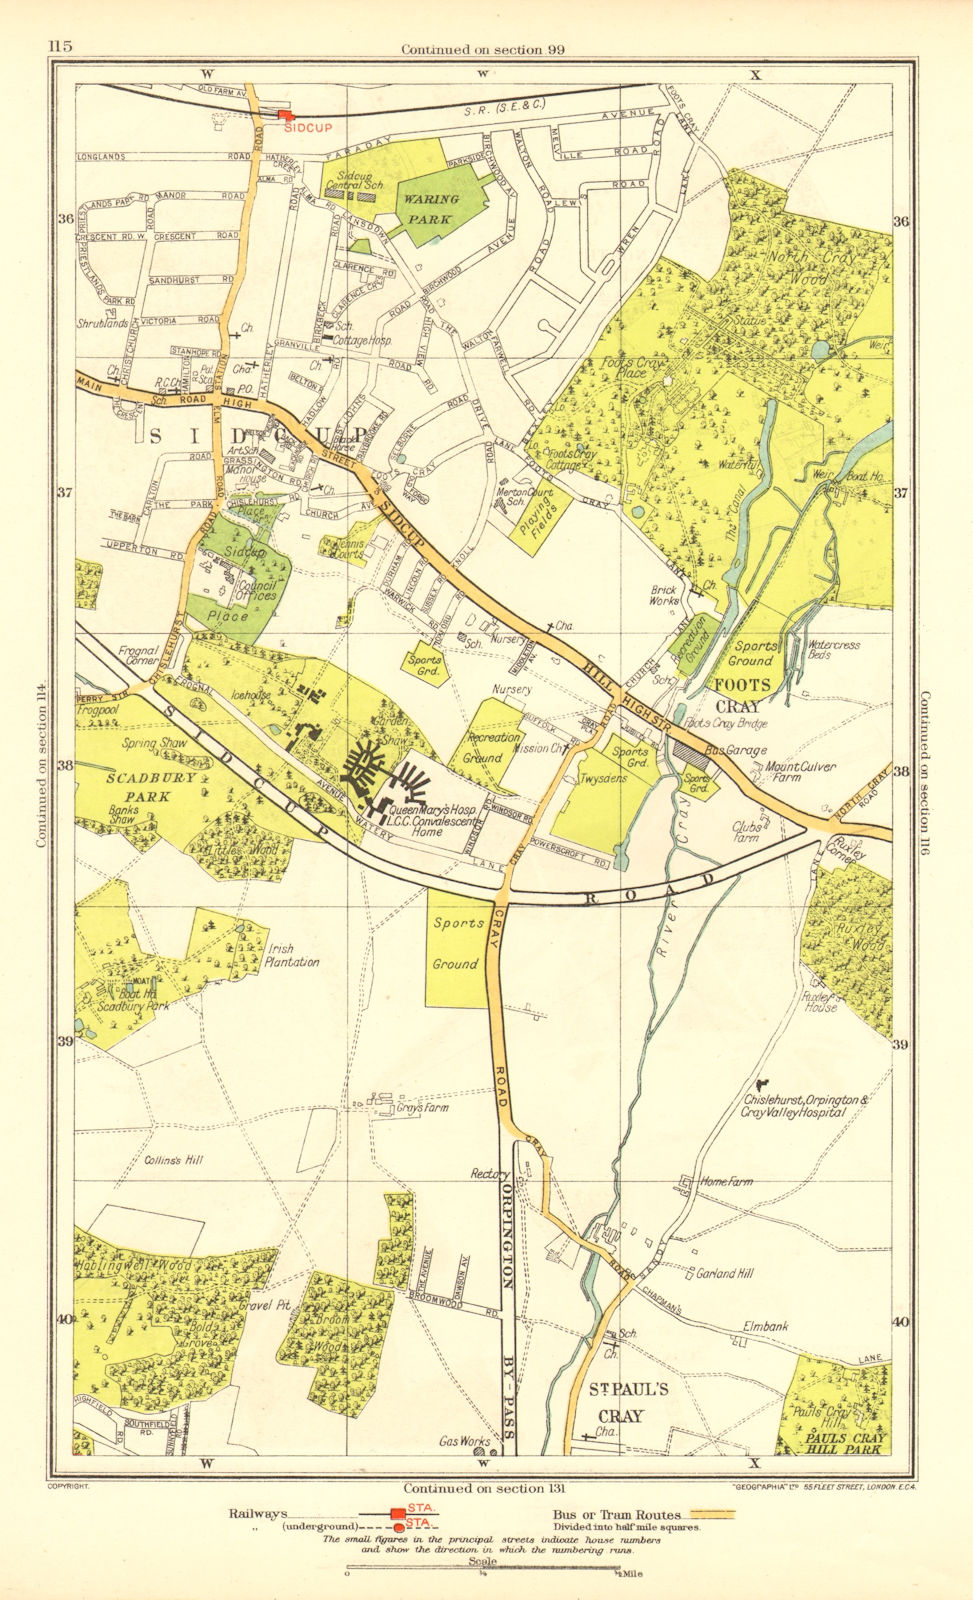 SIDCUP. Foots Cray St Paul's Cray Queen's Hospital Frognal(Q Mary's) 1937 map